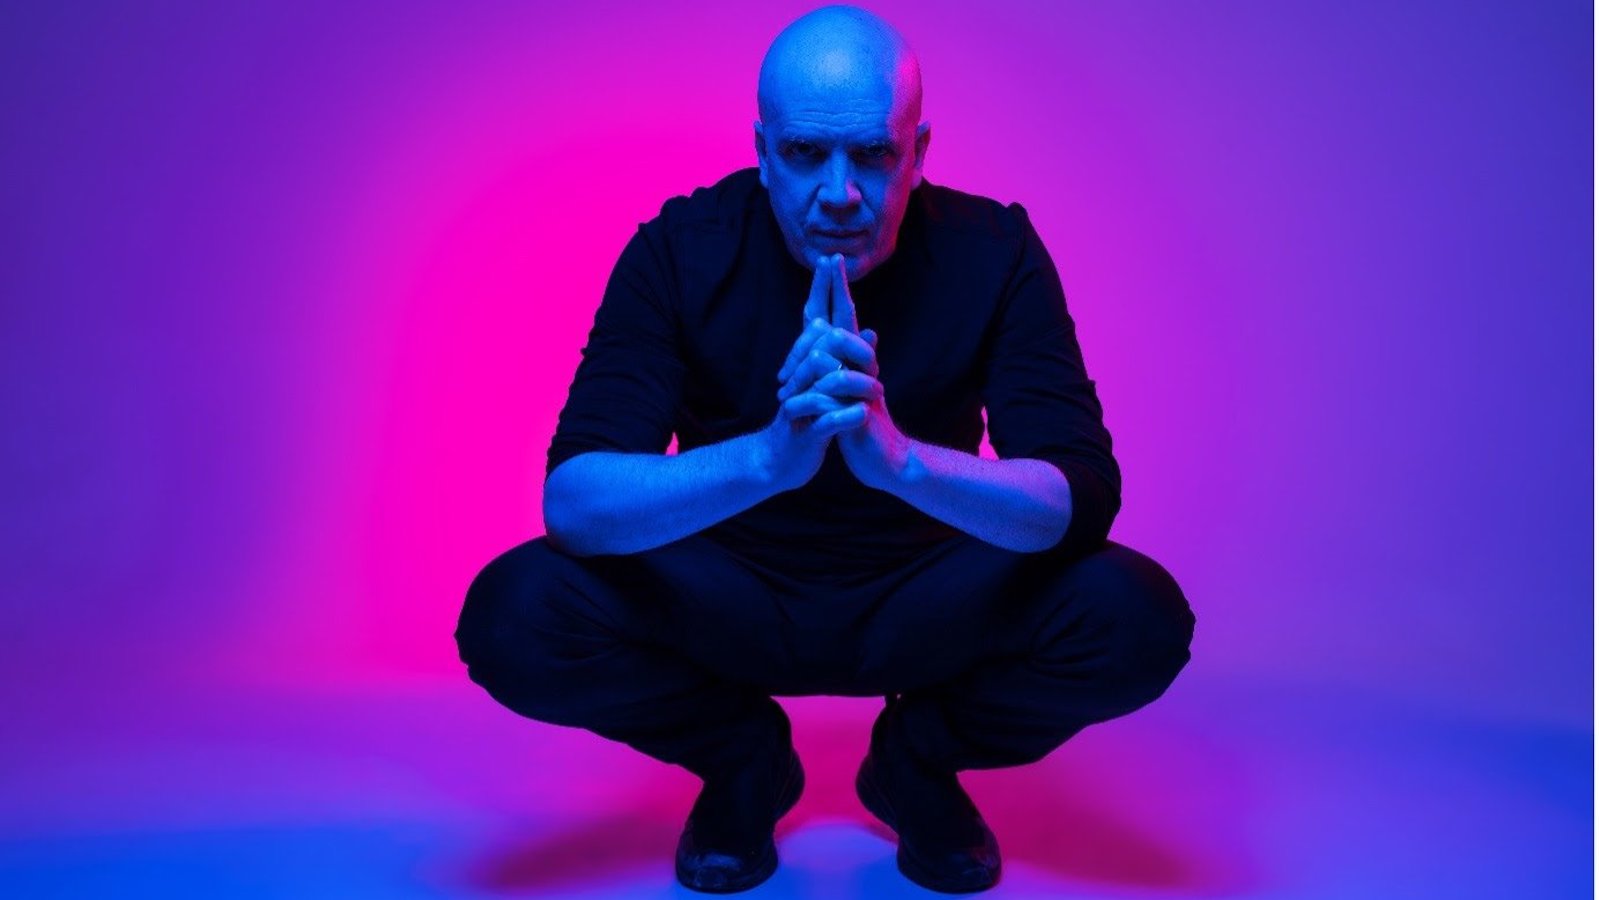 Hear Devin Townsend's Triumphant New Song "Moonpeople" Revolver